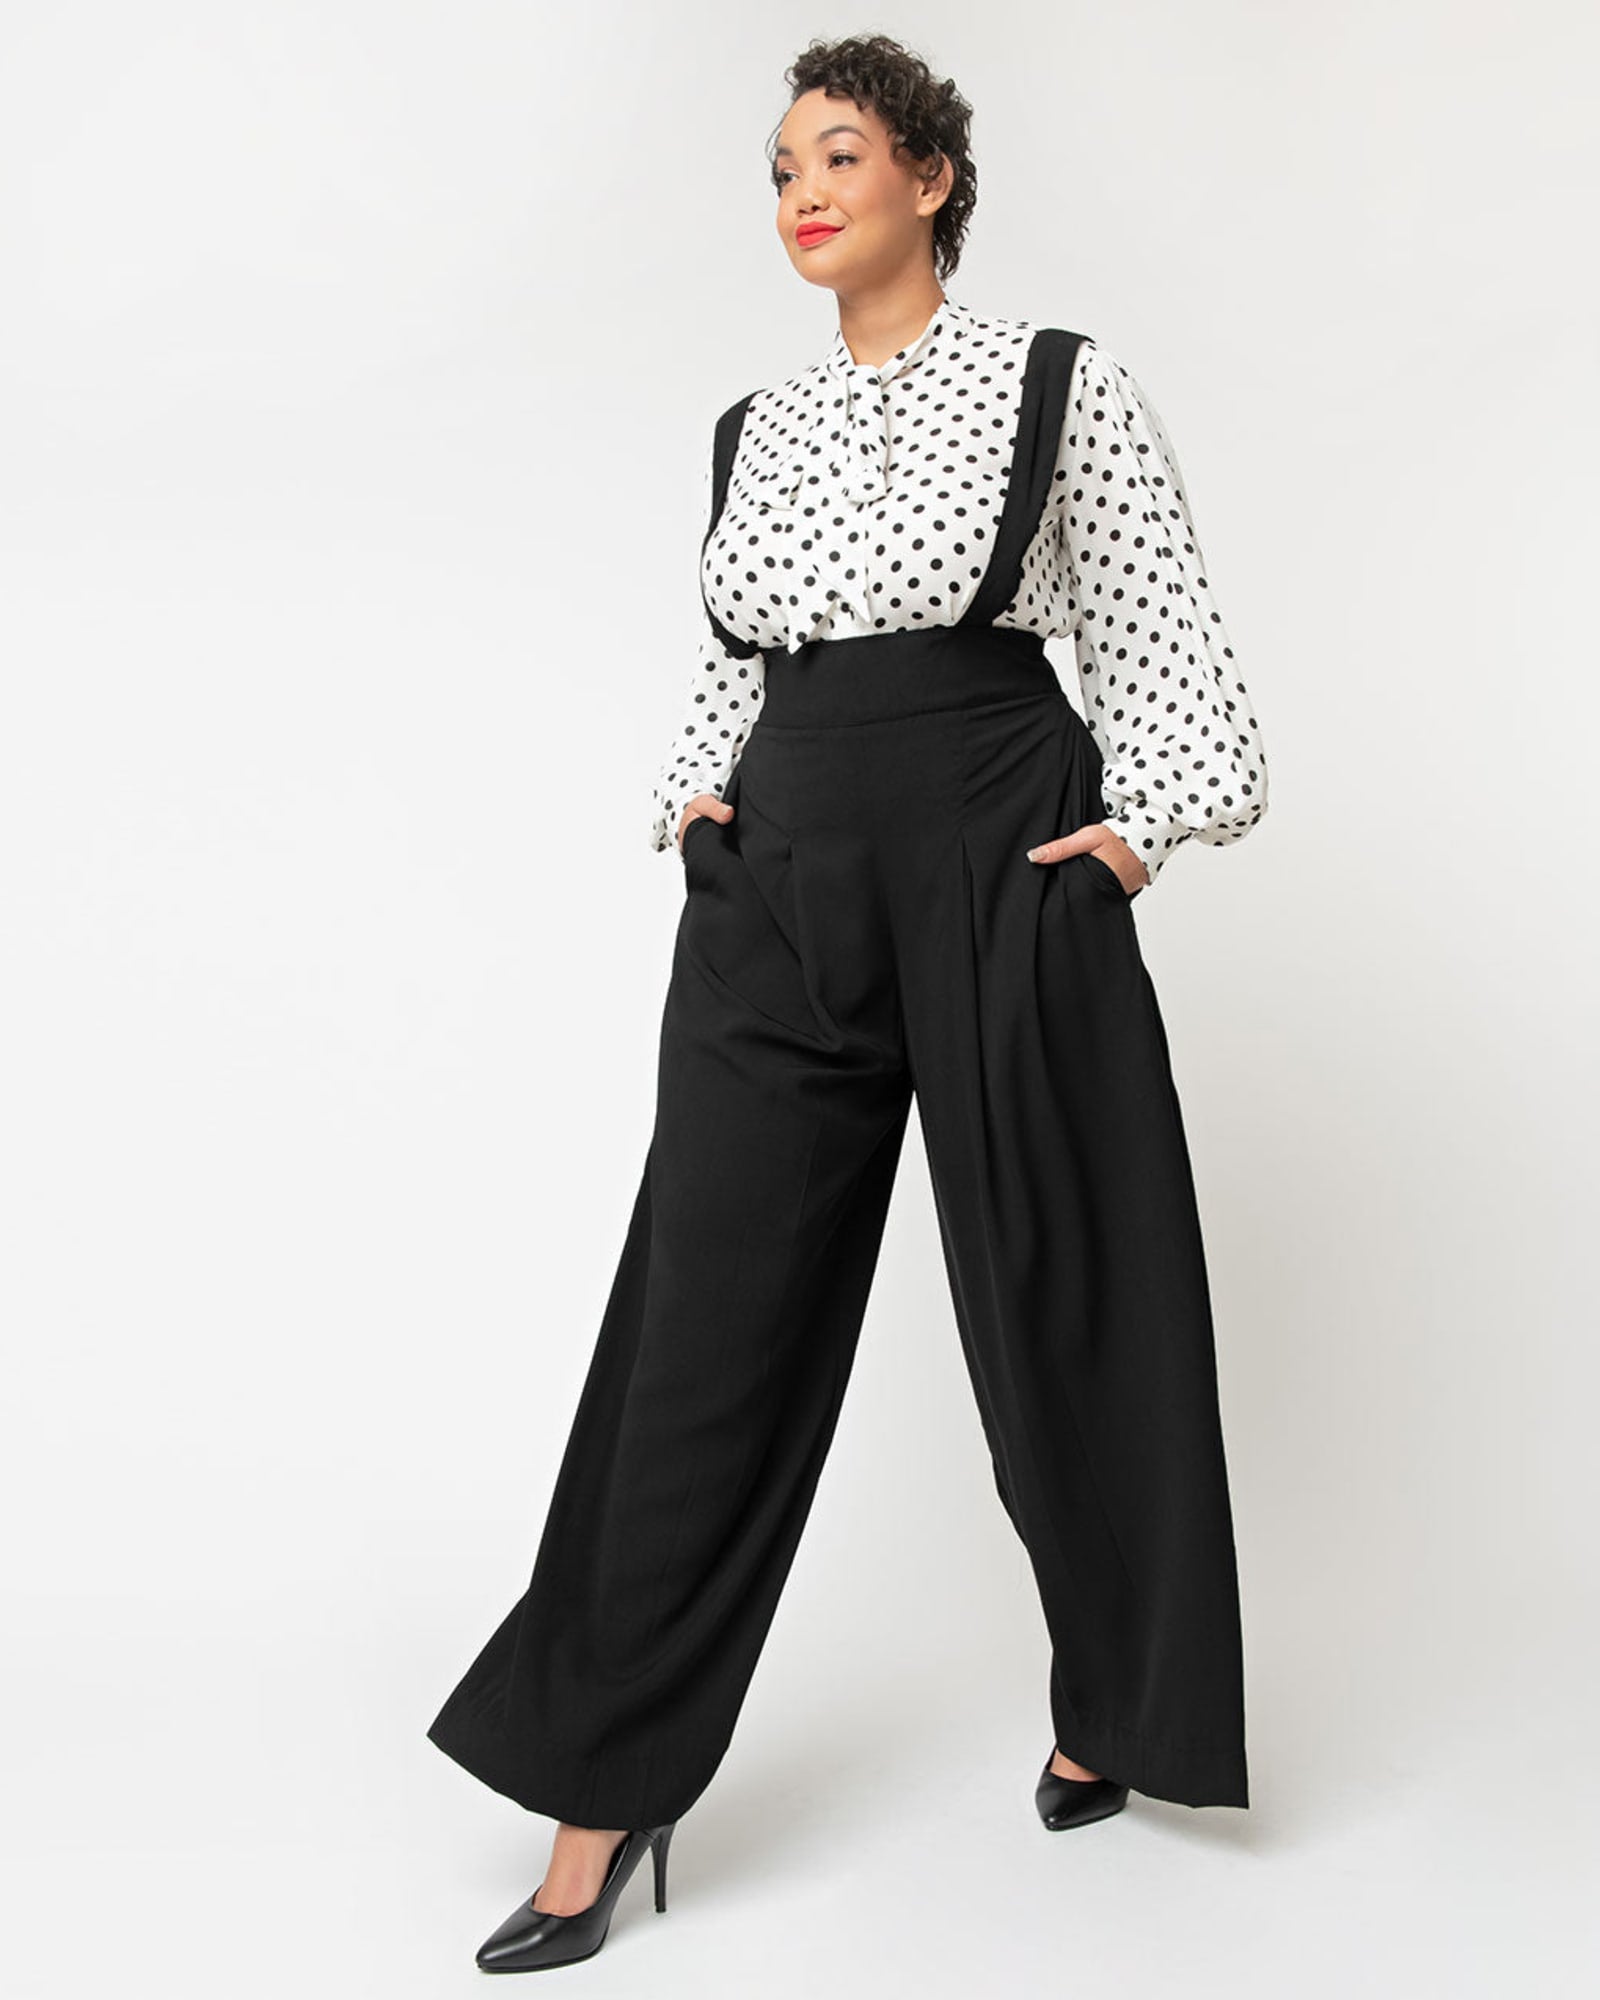 High-rise black pants with suspender straps